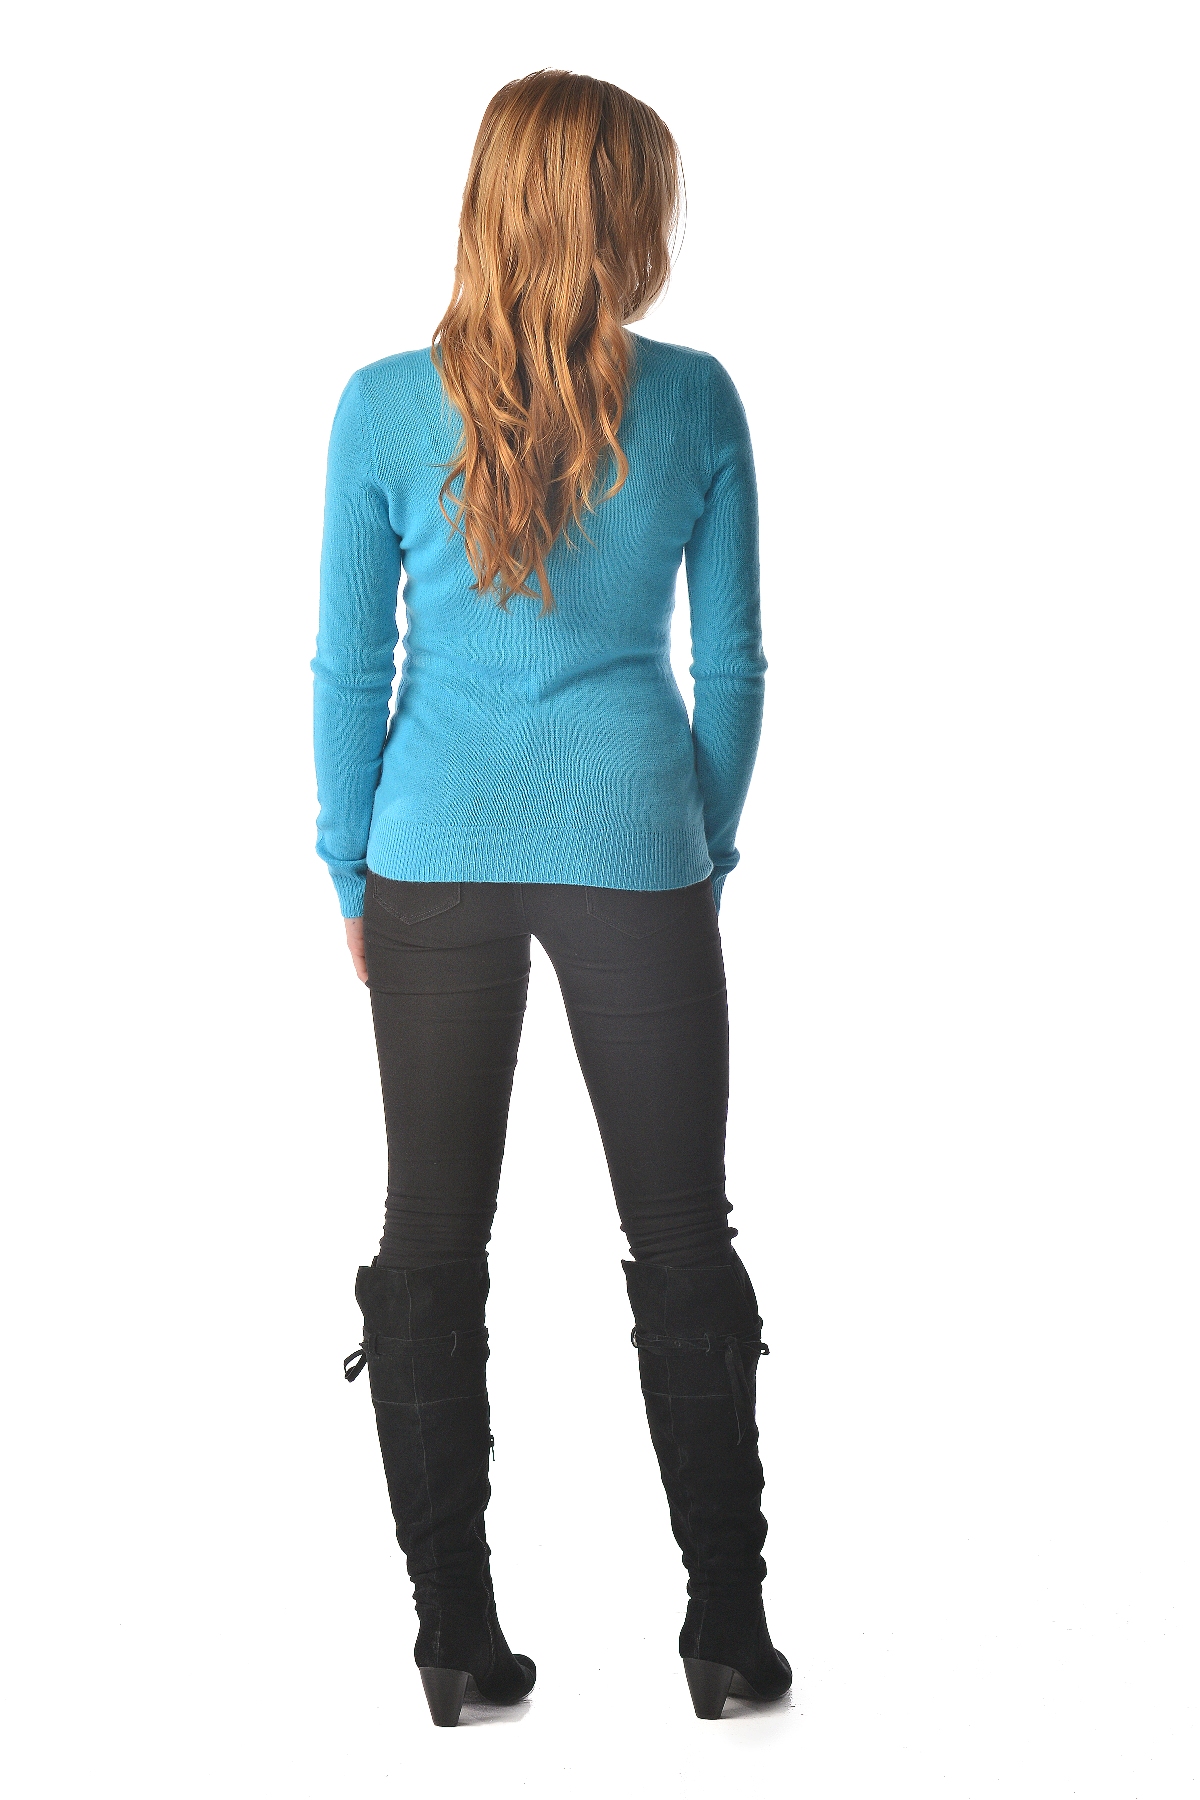 Pure Cashmere V-Neck Spring Sweater for Women (Turquoise Blue, Medium)